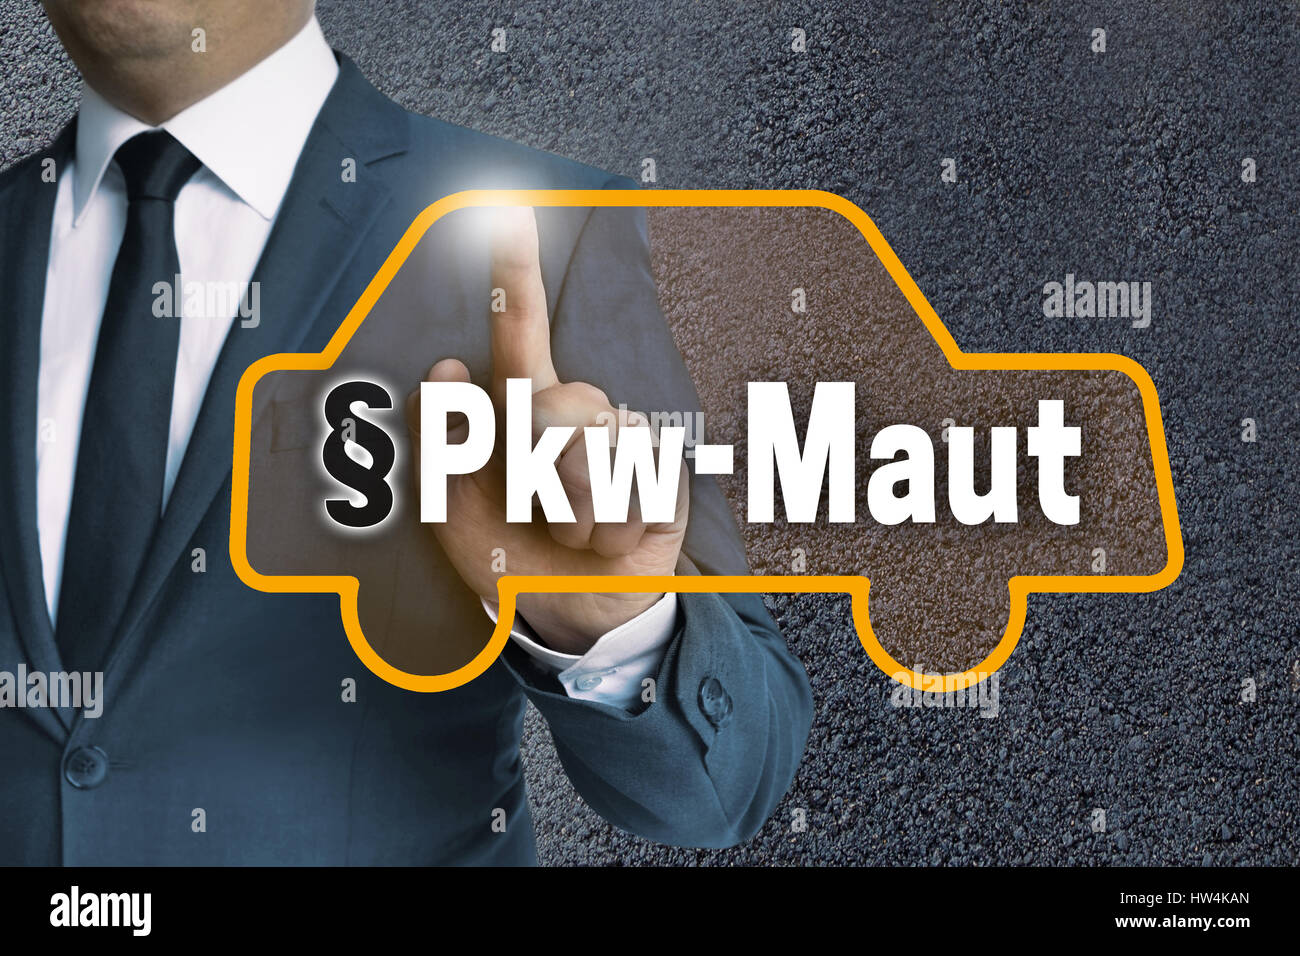 PKW-Maut (in german Car toll) auto touchscreen is operated by businessman concept. Stock Photo